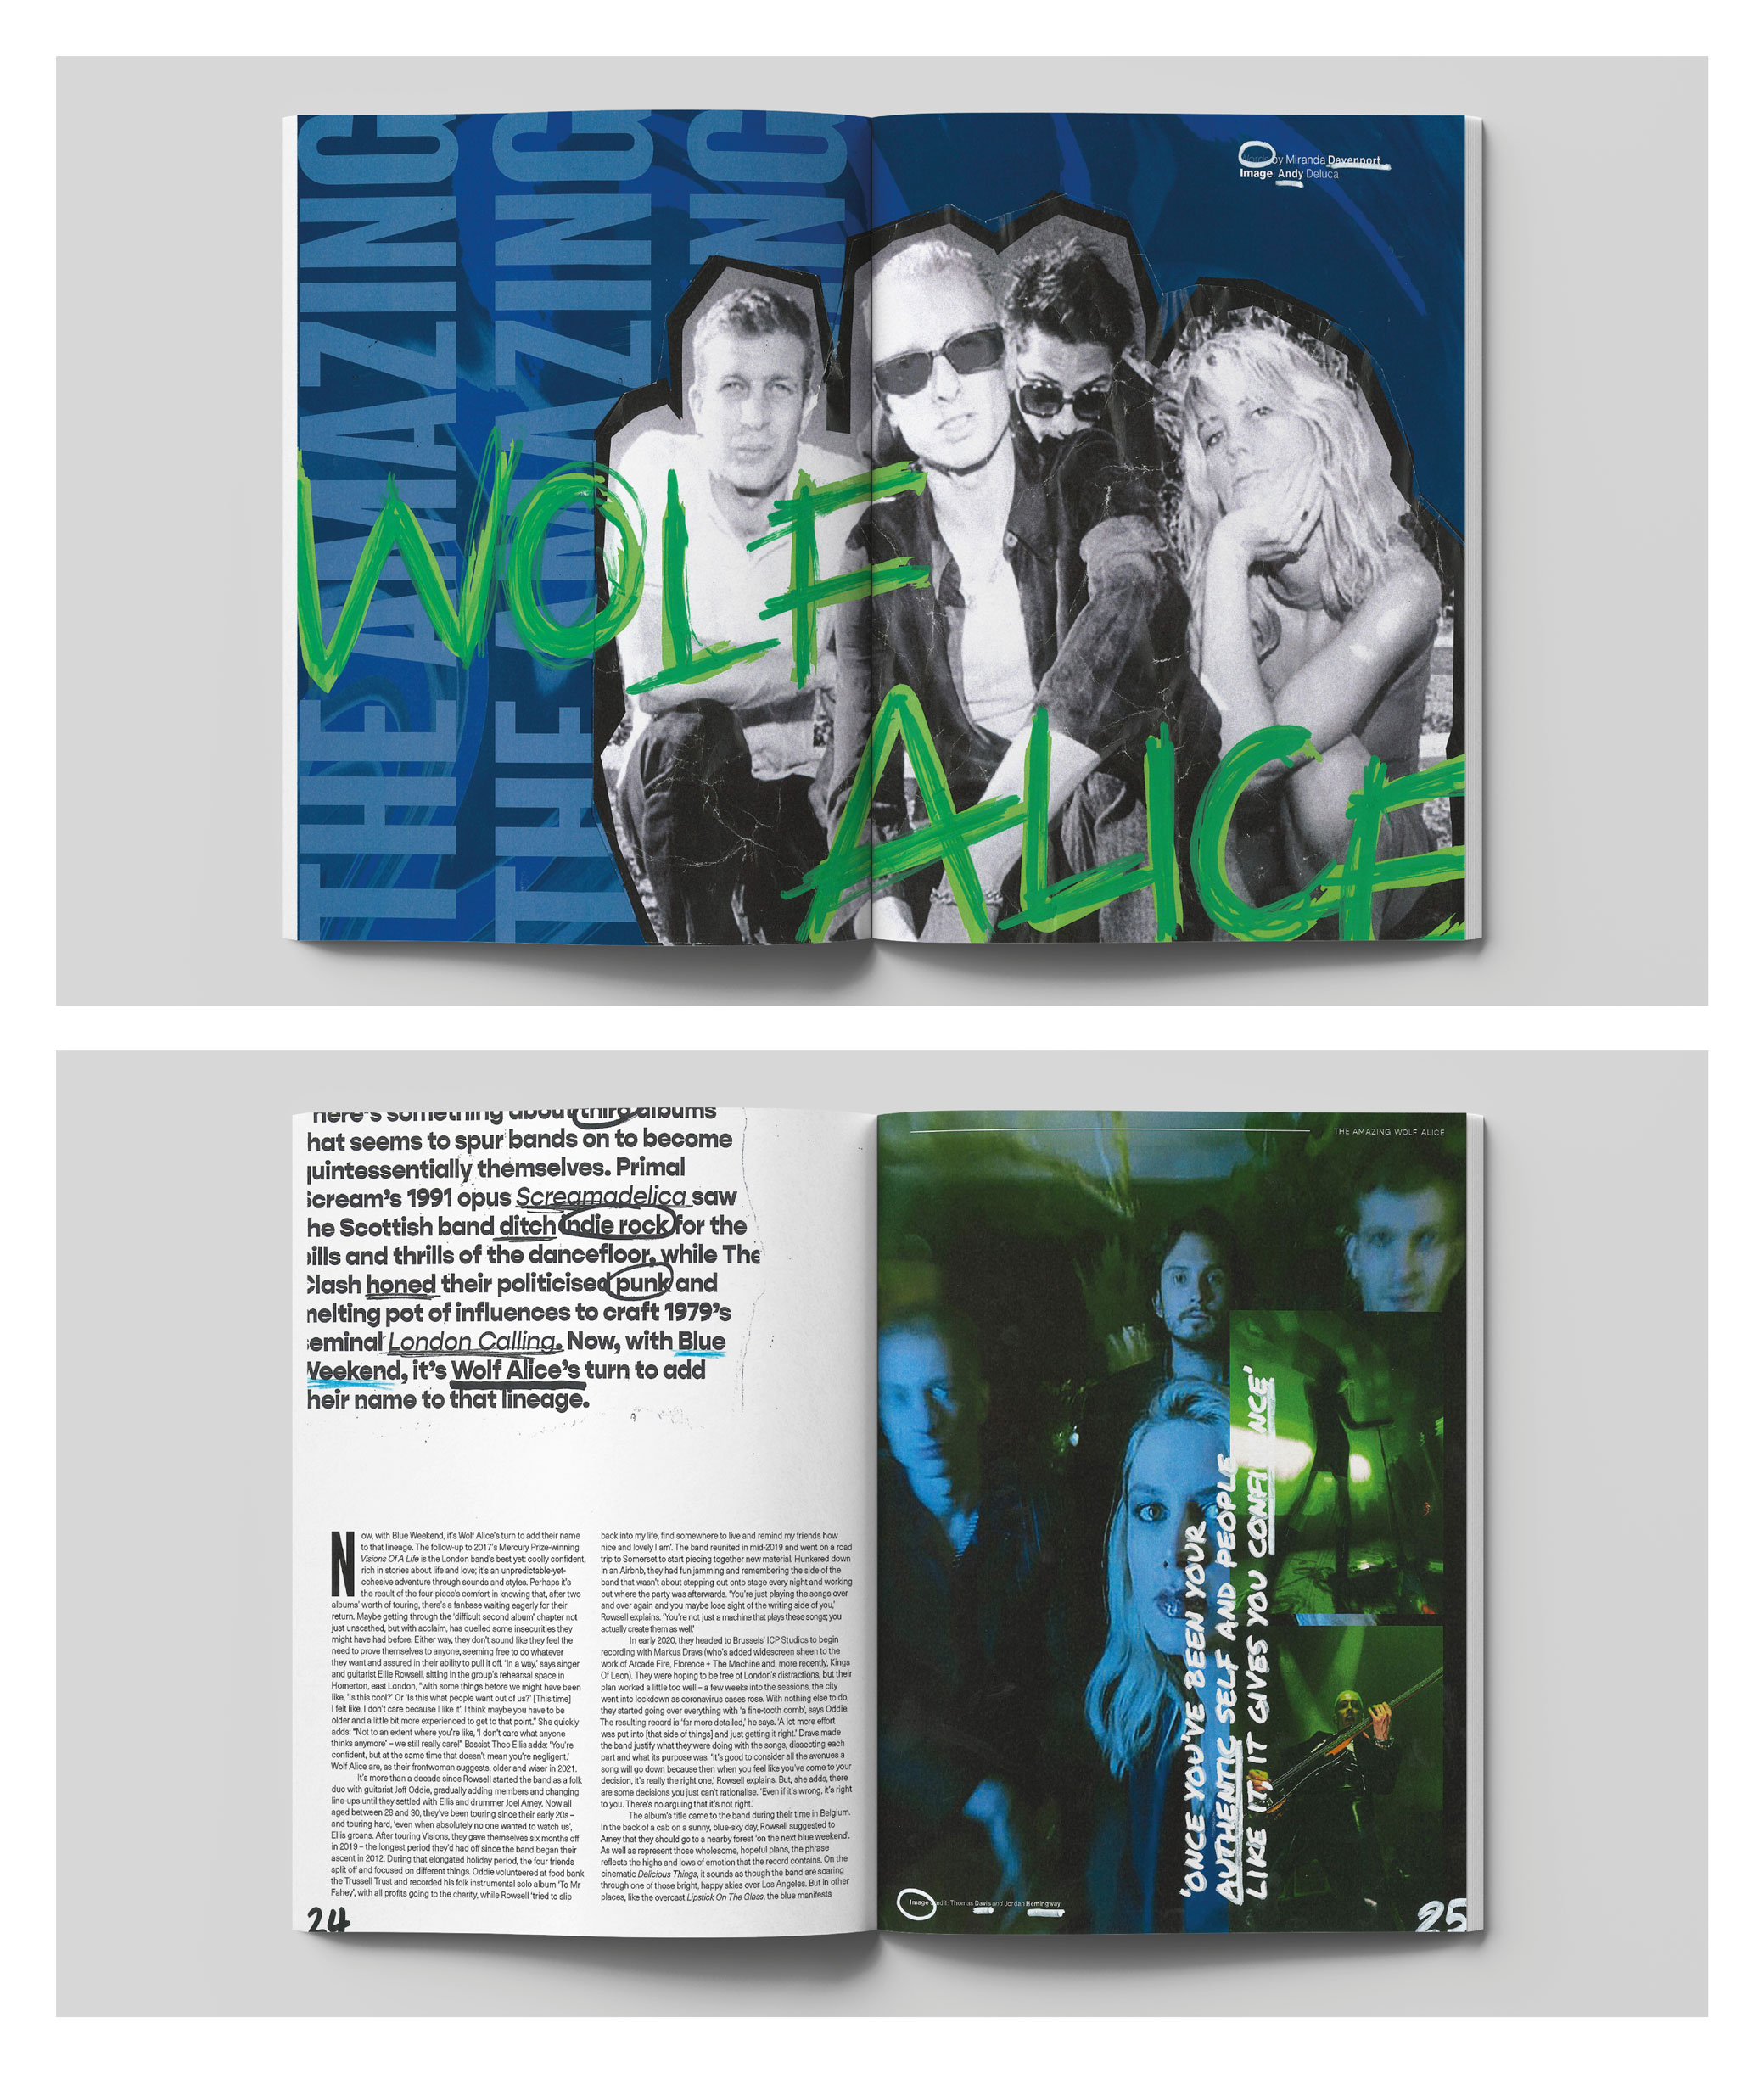 A graphic editorial piece on the band Wolf Alice with a bold and chaotic typographic approach with a collage feel using a green and blue colour palette.